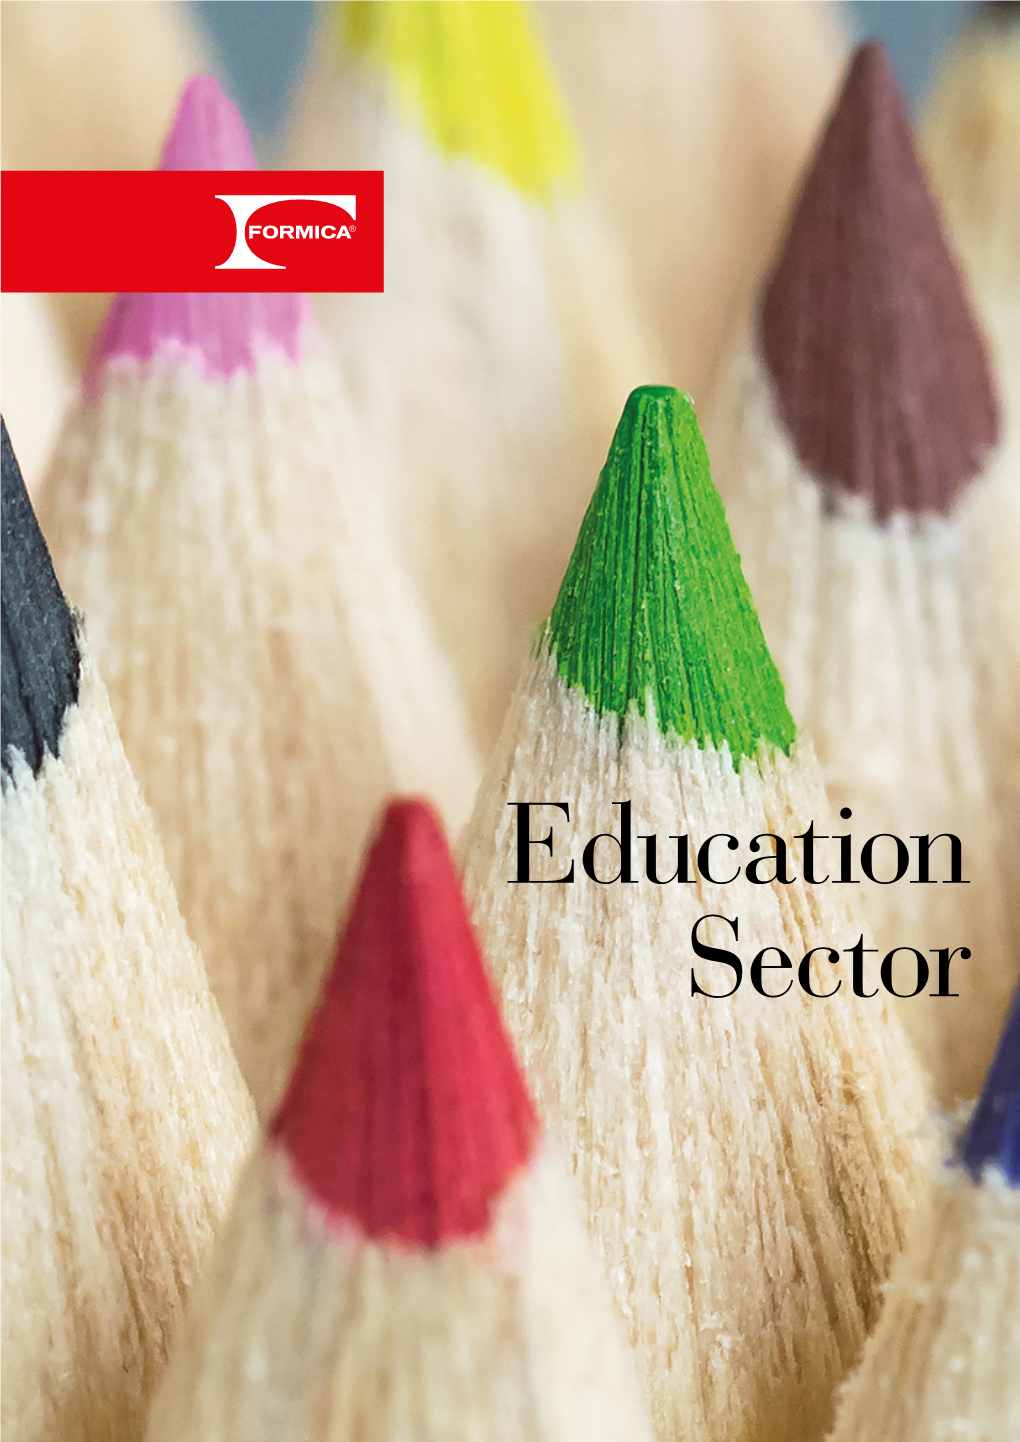 Education Sector FORMICA® in the Education Sector